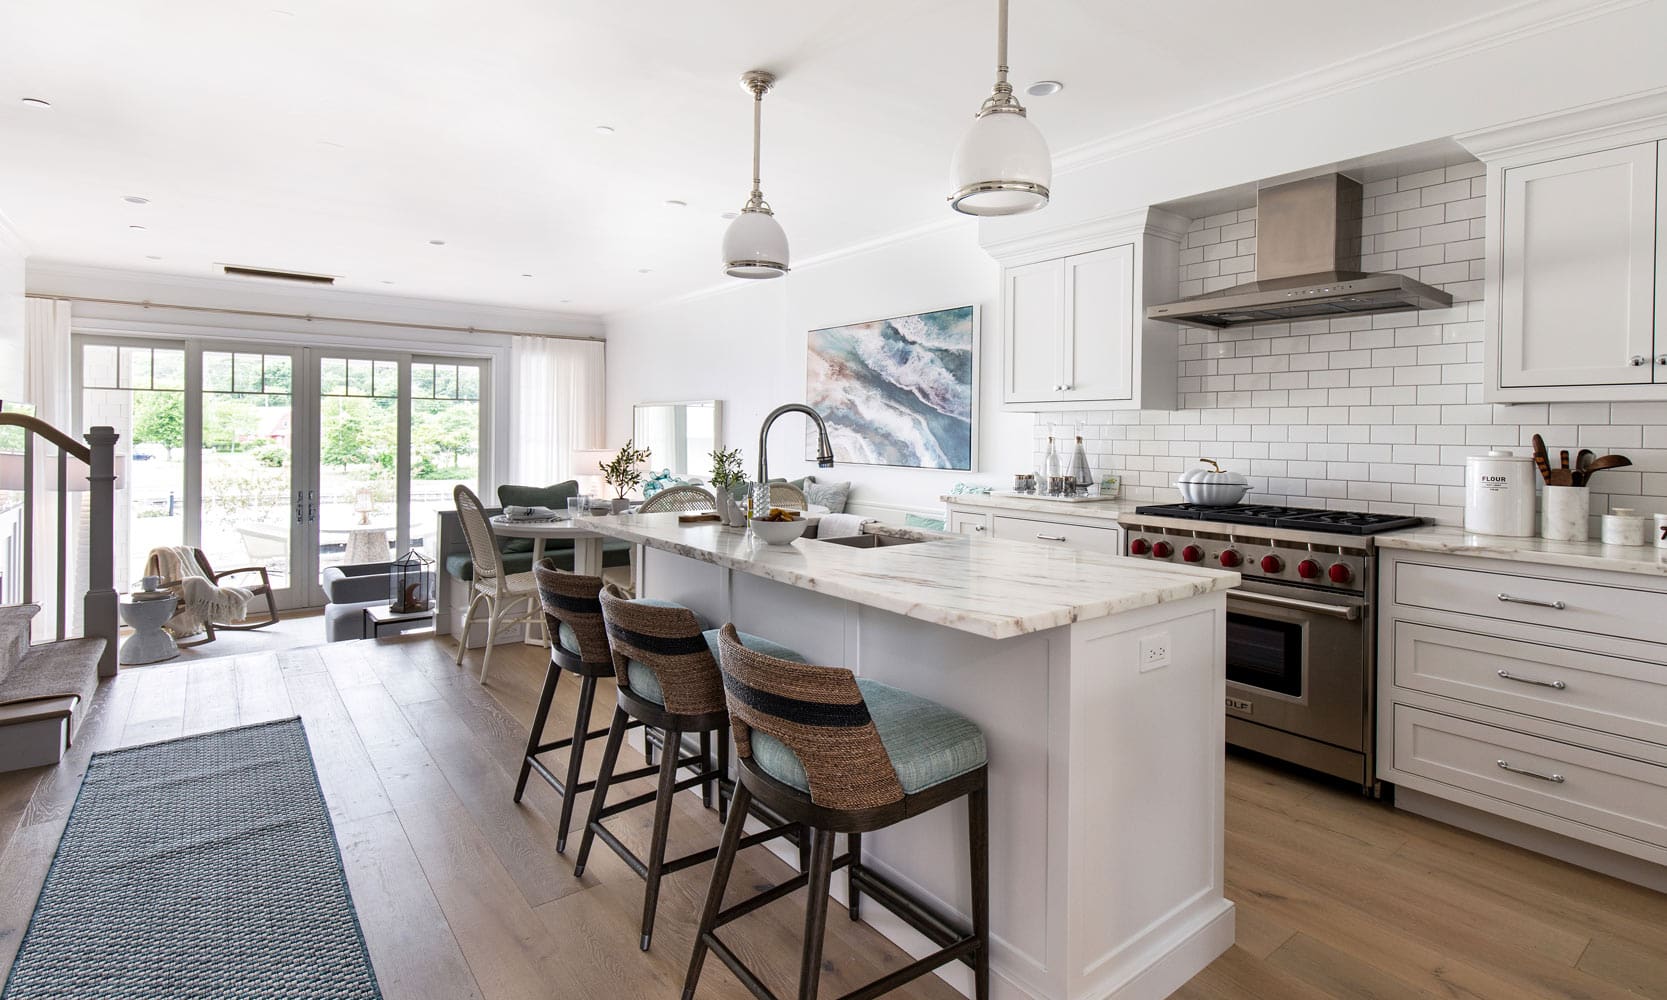 Hamptons boathouse kitchen interiors designed by Annette Jaffe Interiors